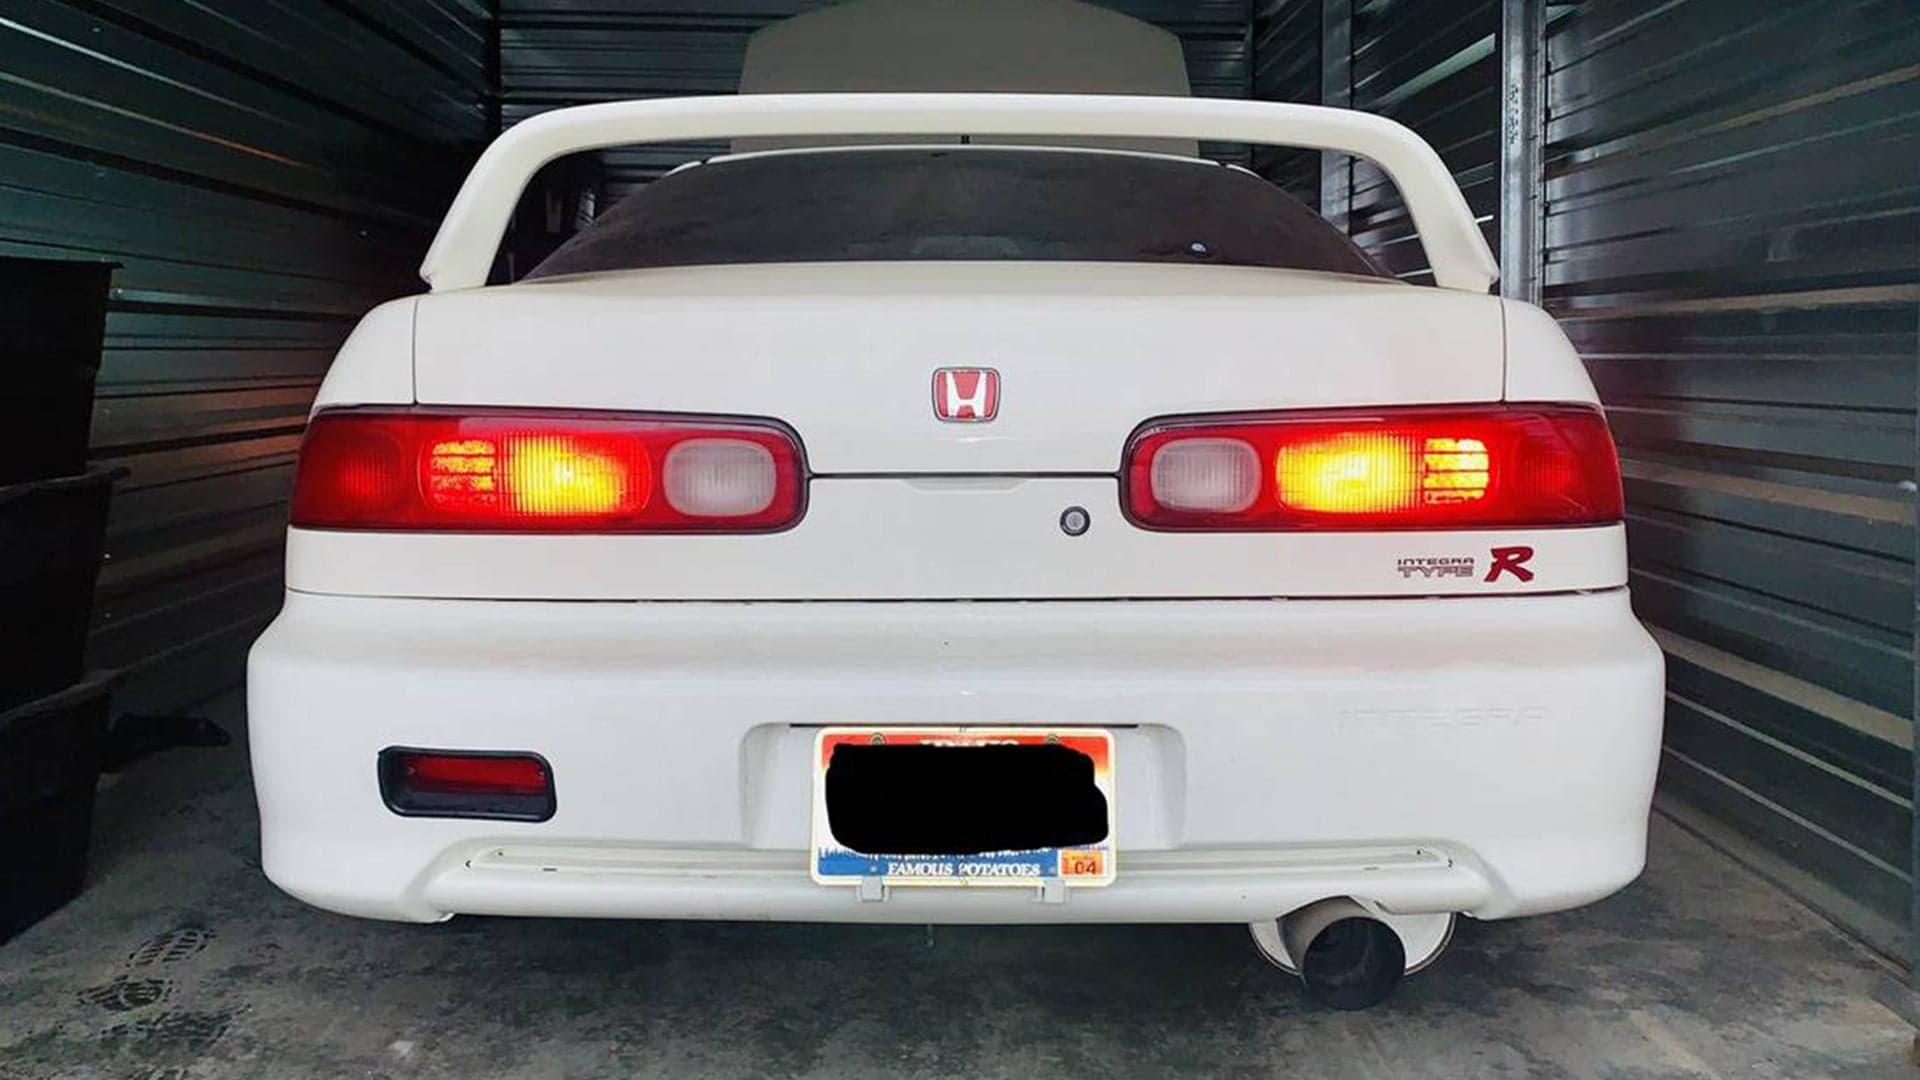 Craigslist Safari: Is the Salvage Discount Worth It for a 1998 Acura Integra Type R?